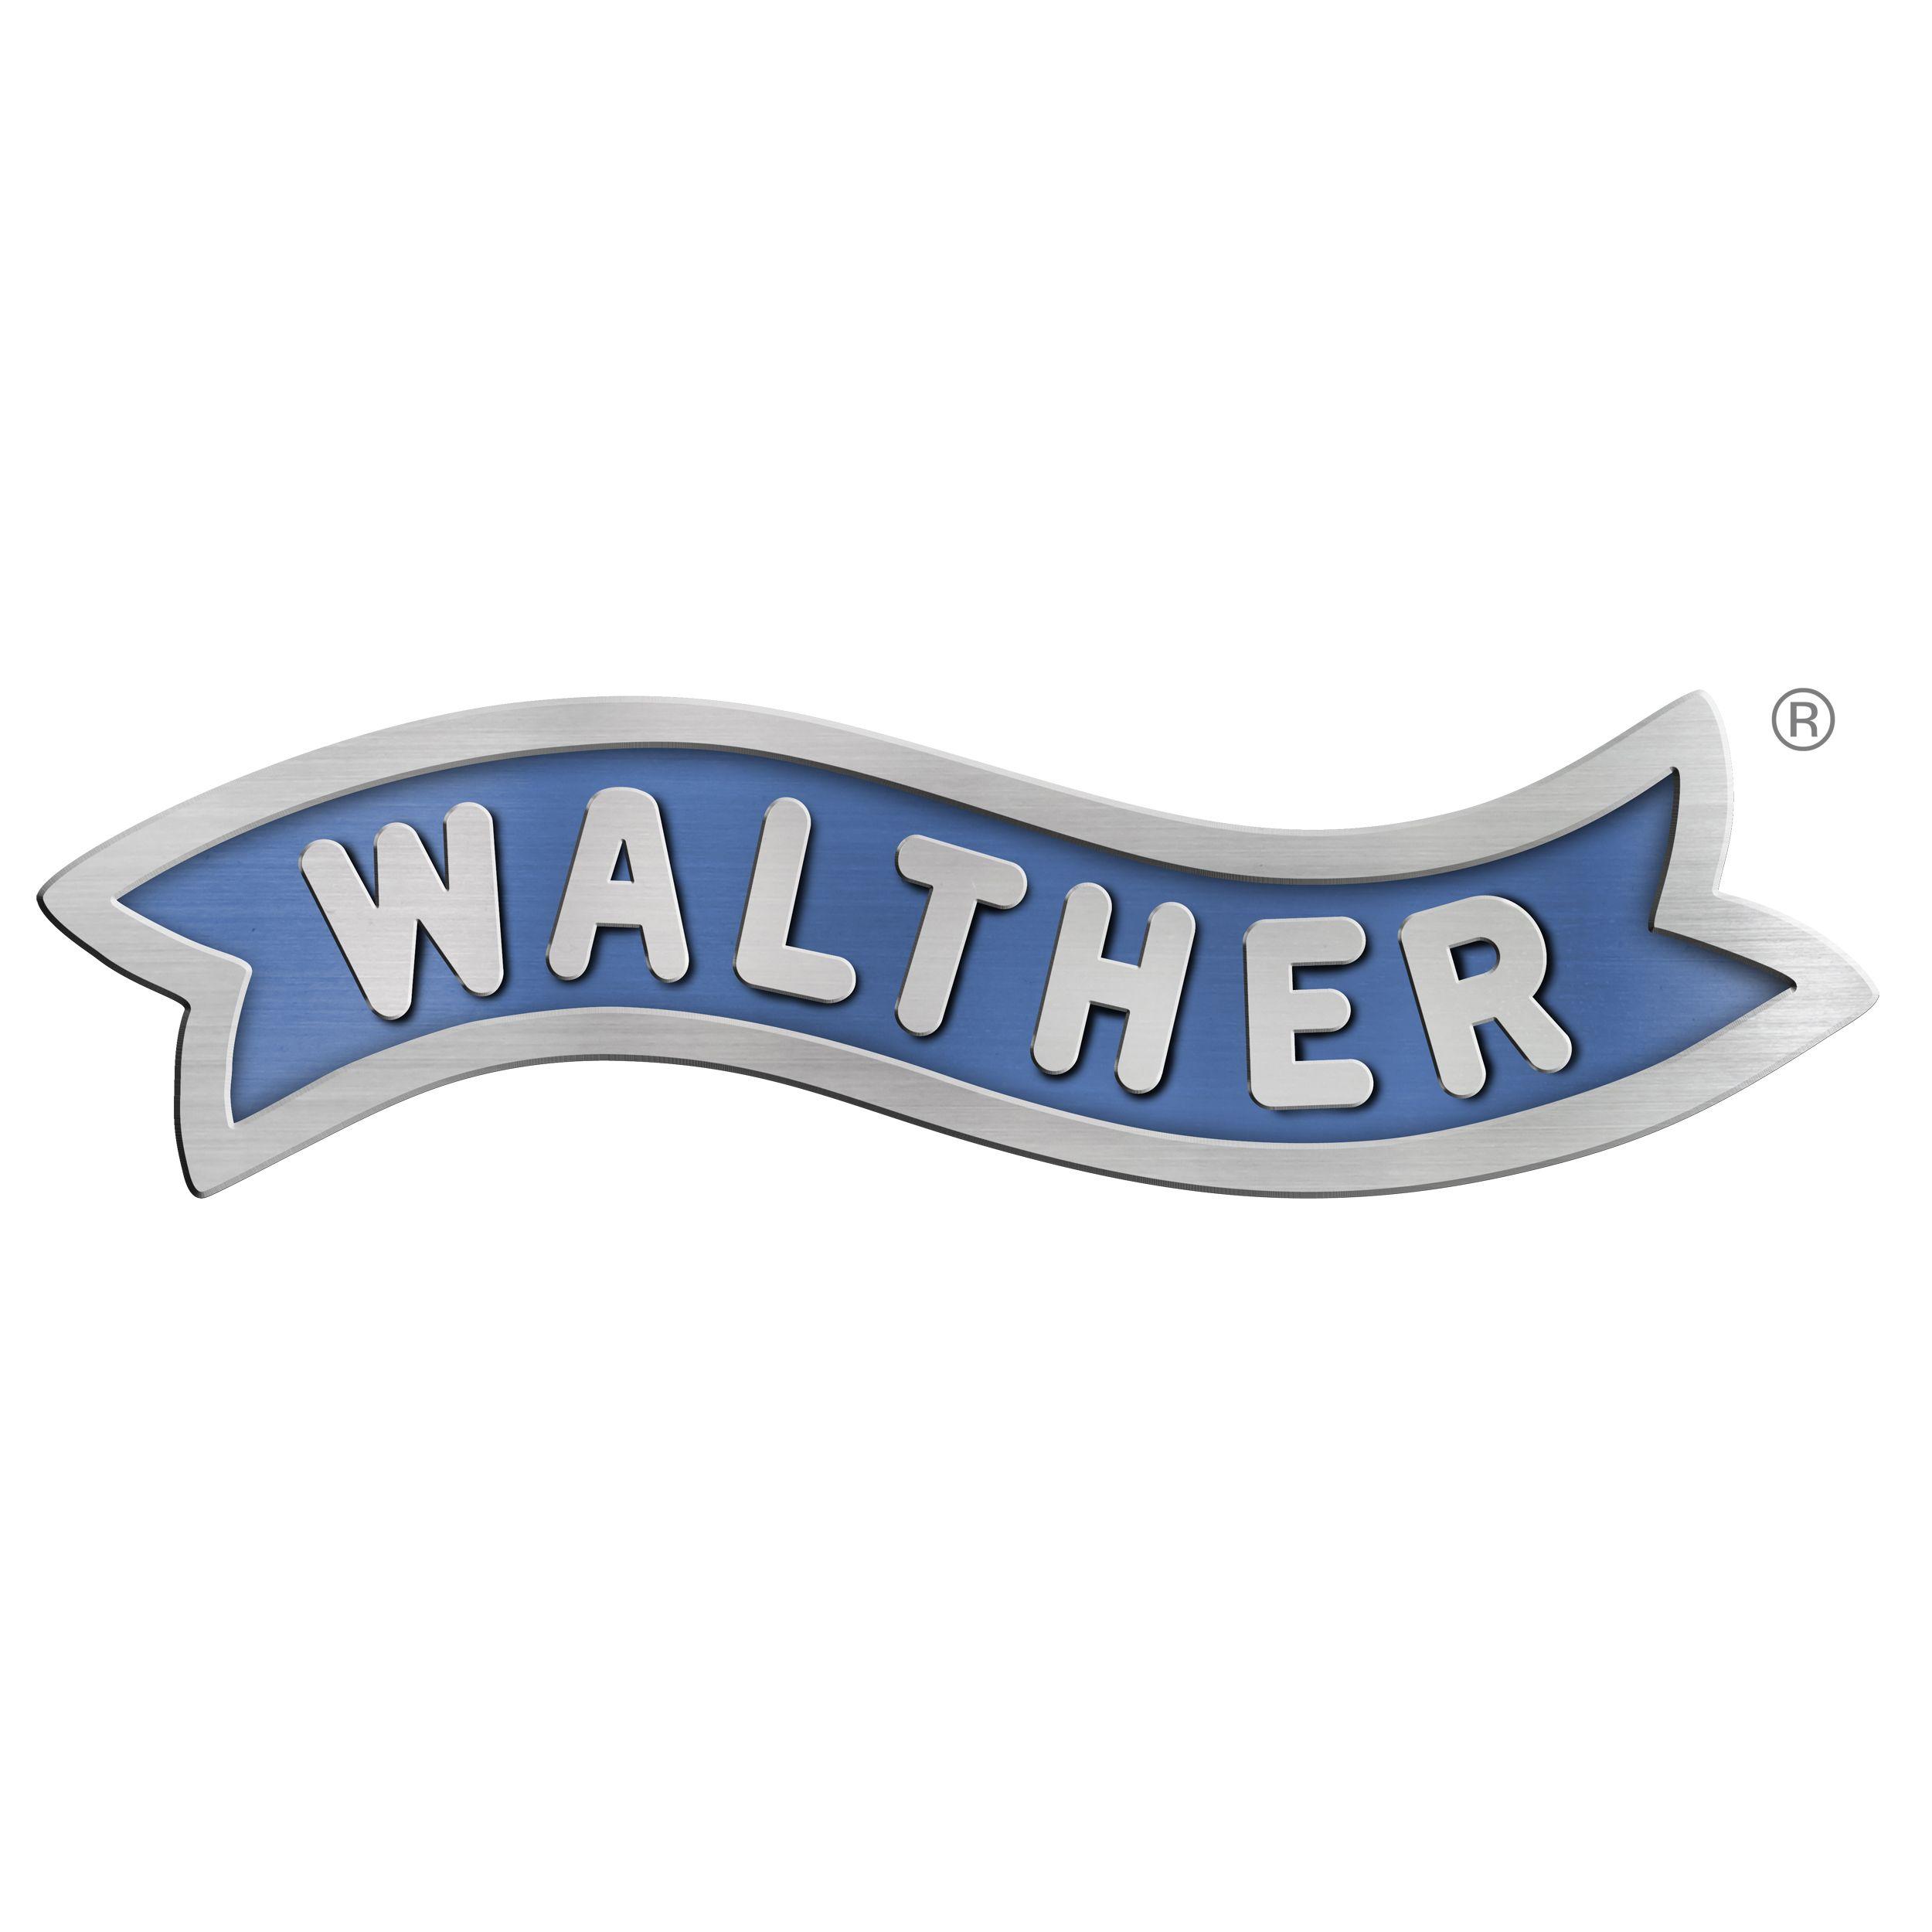 Walther Logo - Tactical Zone Catalog Image